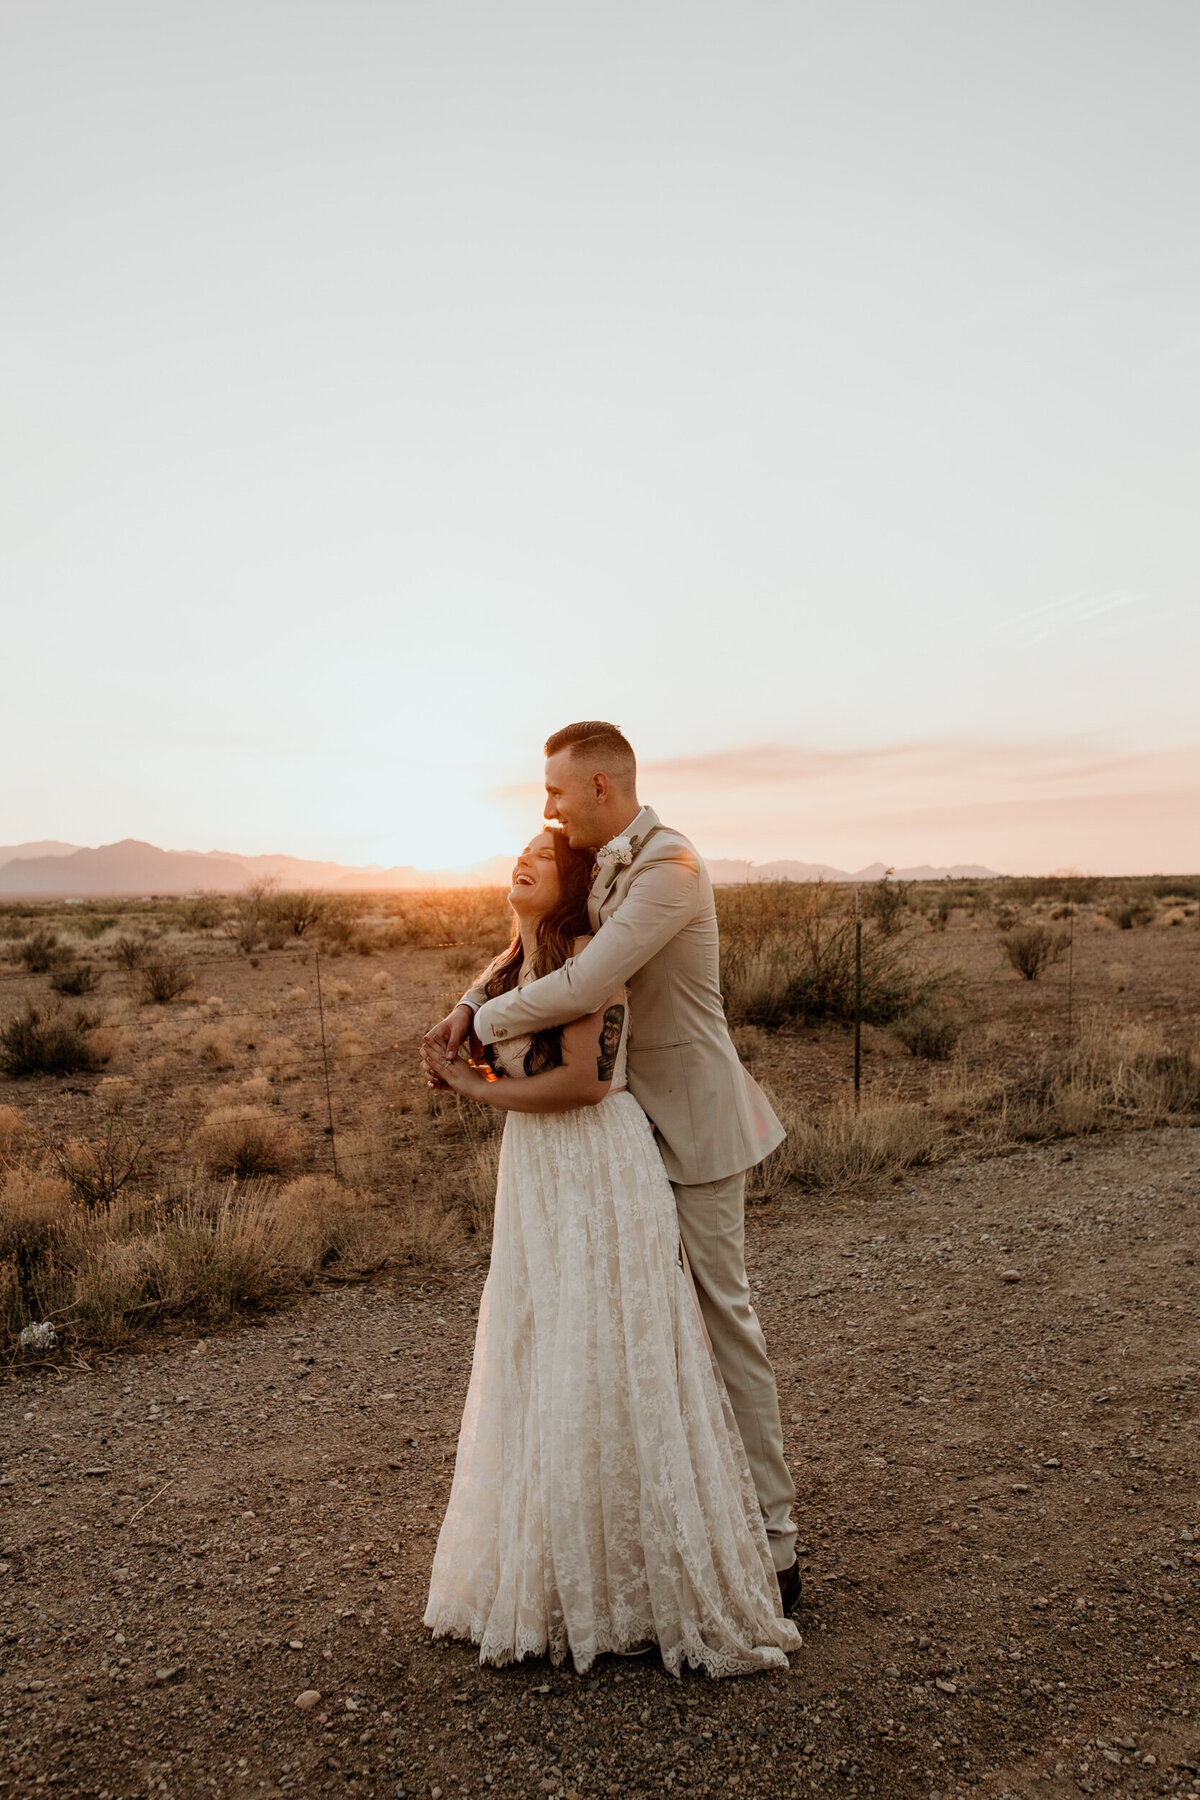 groom hugging bride from behind in the desert at sunset